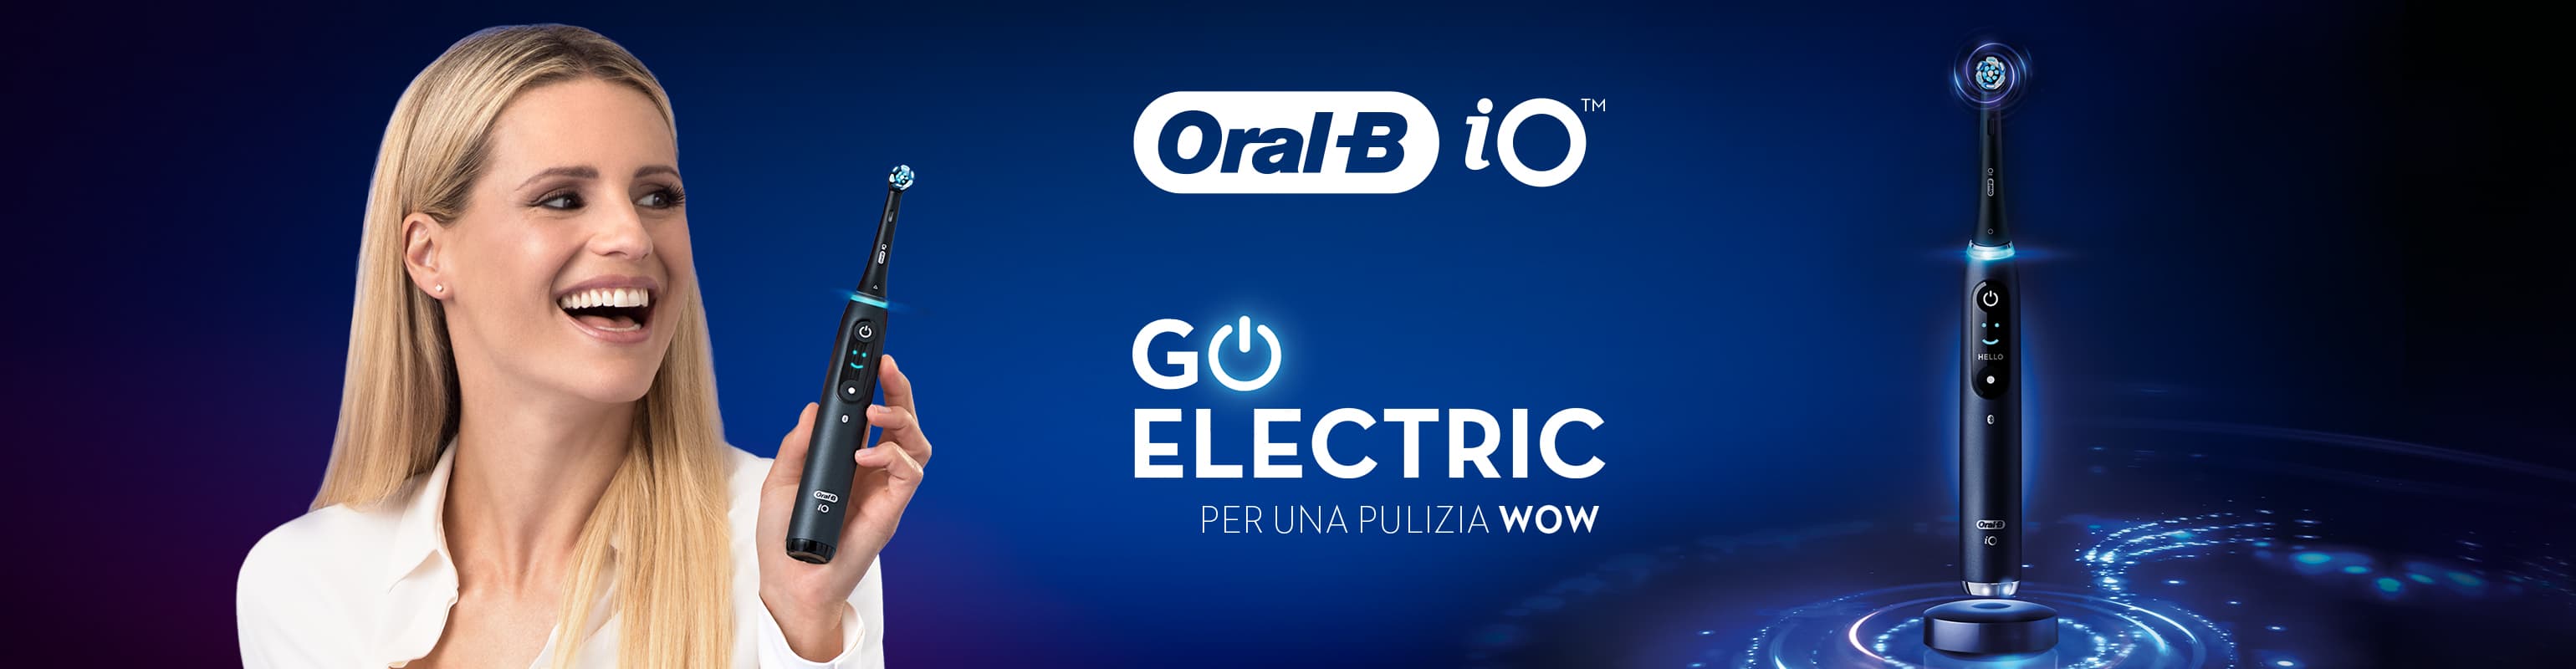 img Oral-B banner istituzionale